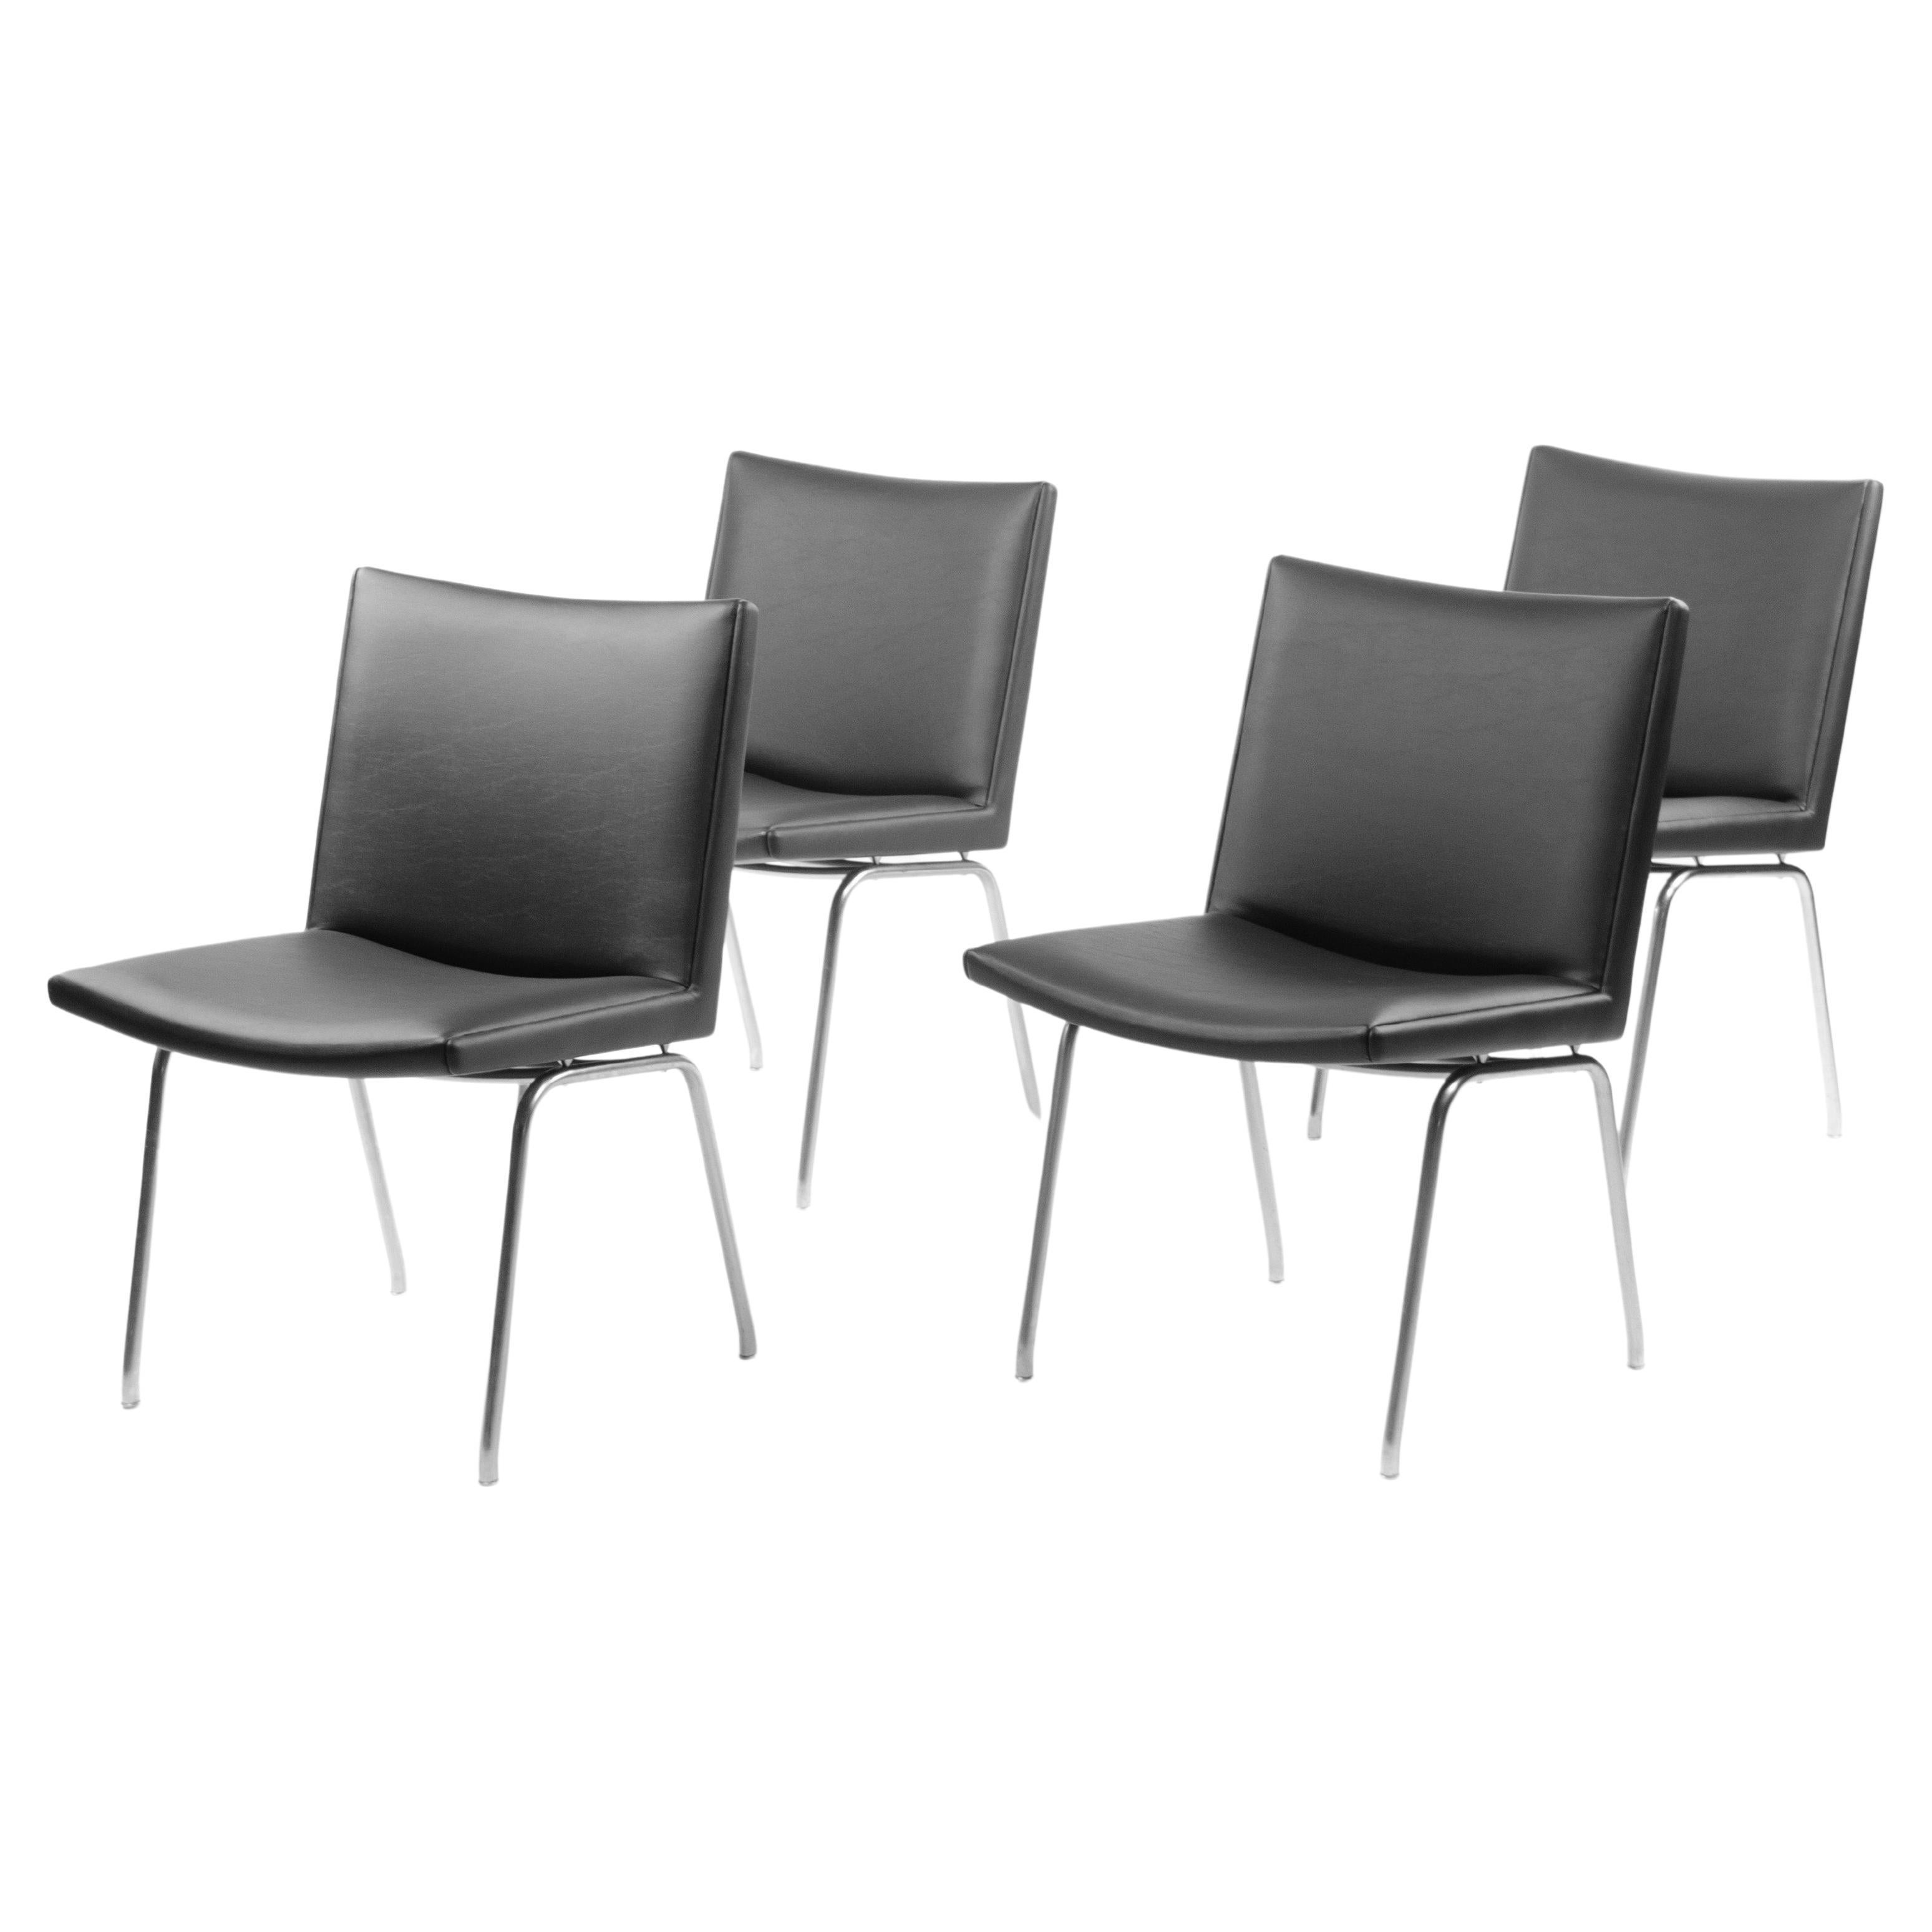 Listed for sale is a set of ten (price listed includes all ten chairs) Hans Wegner airport chairs AP38, produced by A.P. Stolen in Denmark during the 1960's.

The chairs are in superb condition and have brand new upholstery on them, beautifully done